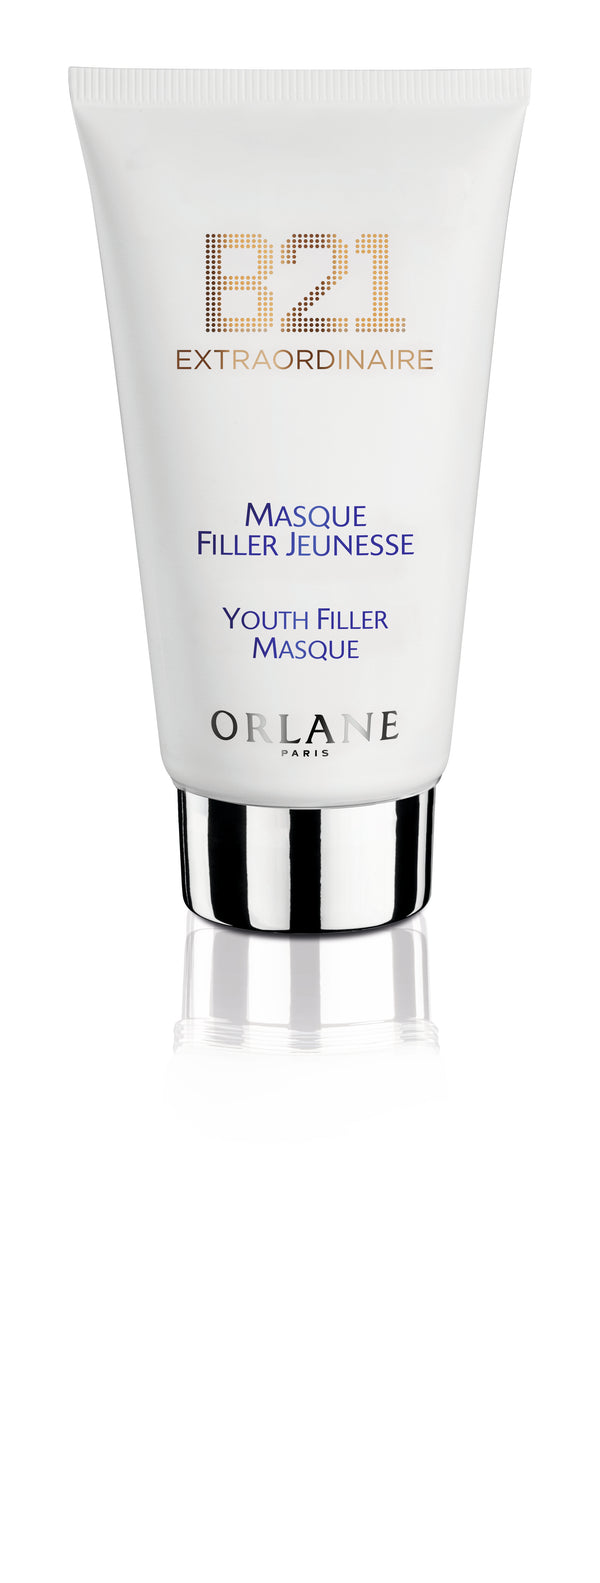 Orlane B21 Extraordinaire Youth Filler Mask